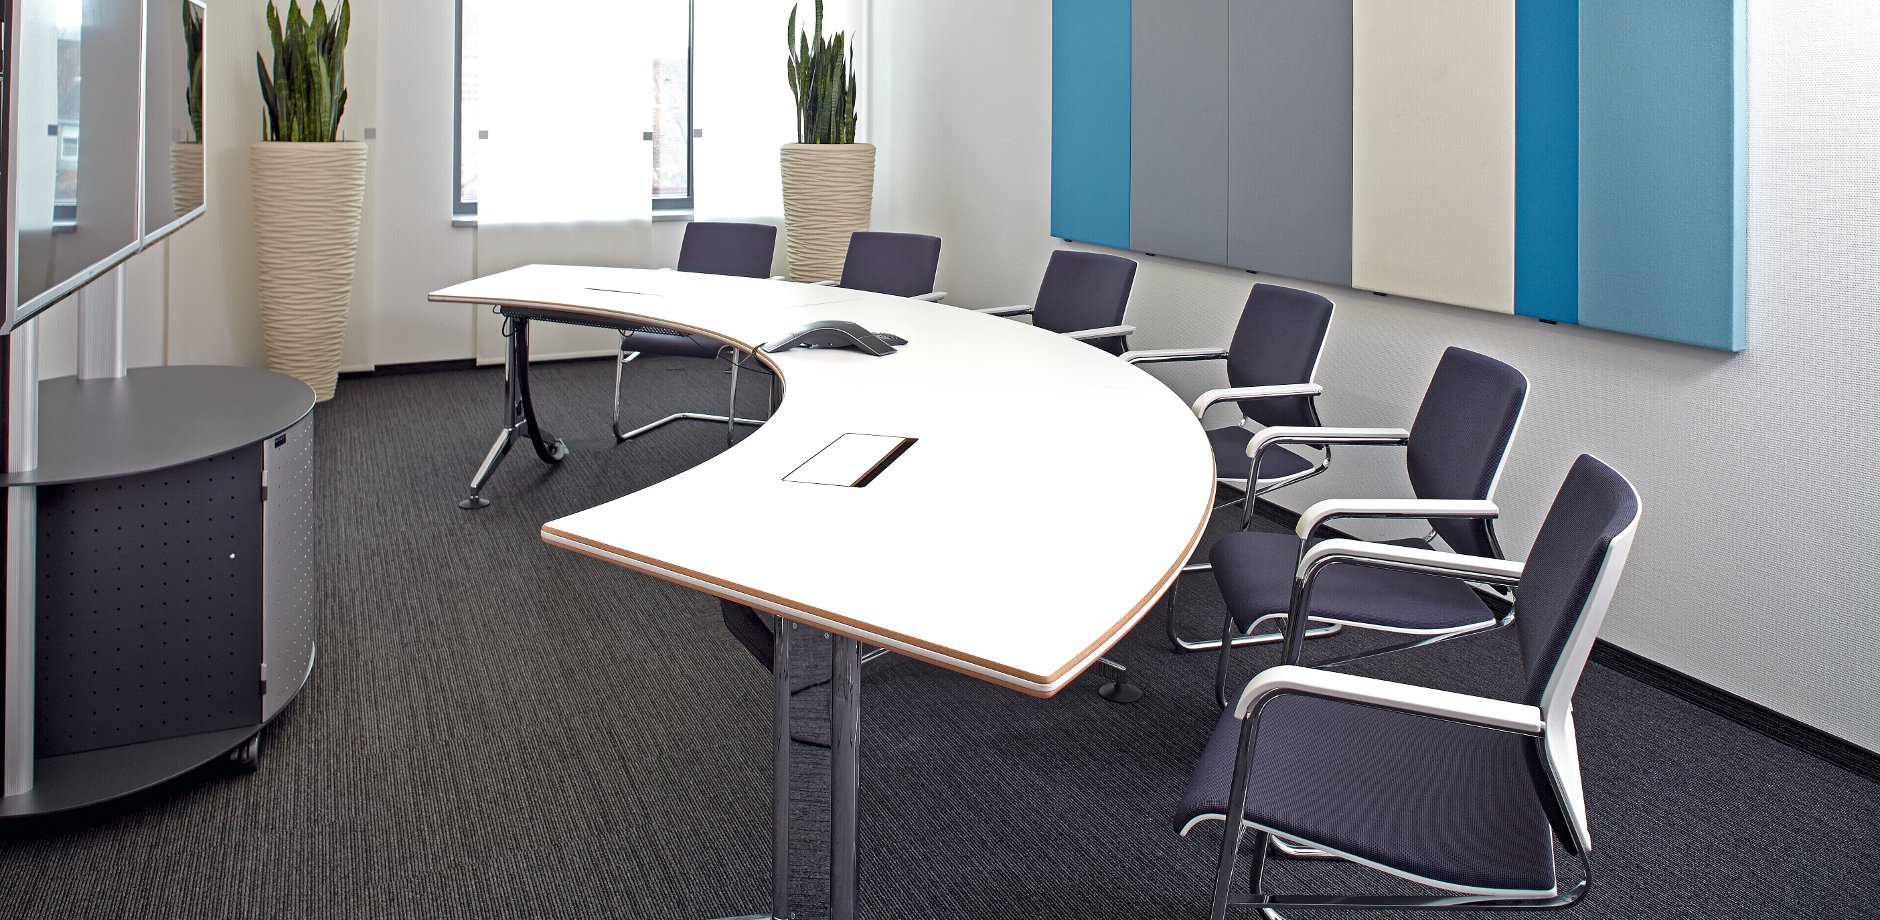 Ipsen Pharma, Germany, Sito cantilever chair and Logon conference table by Wilkhahn